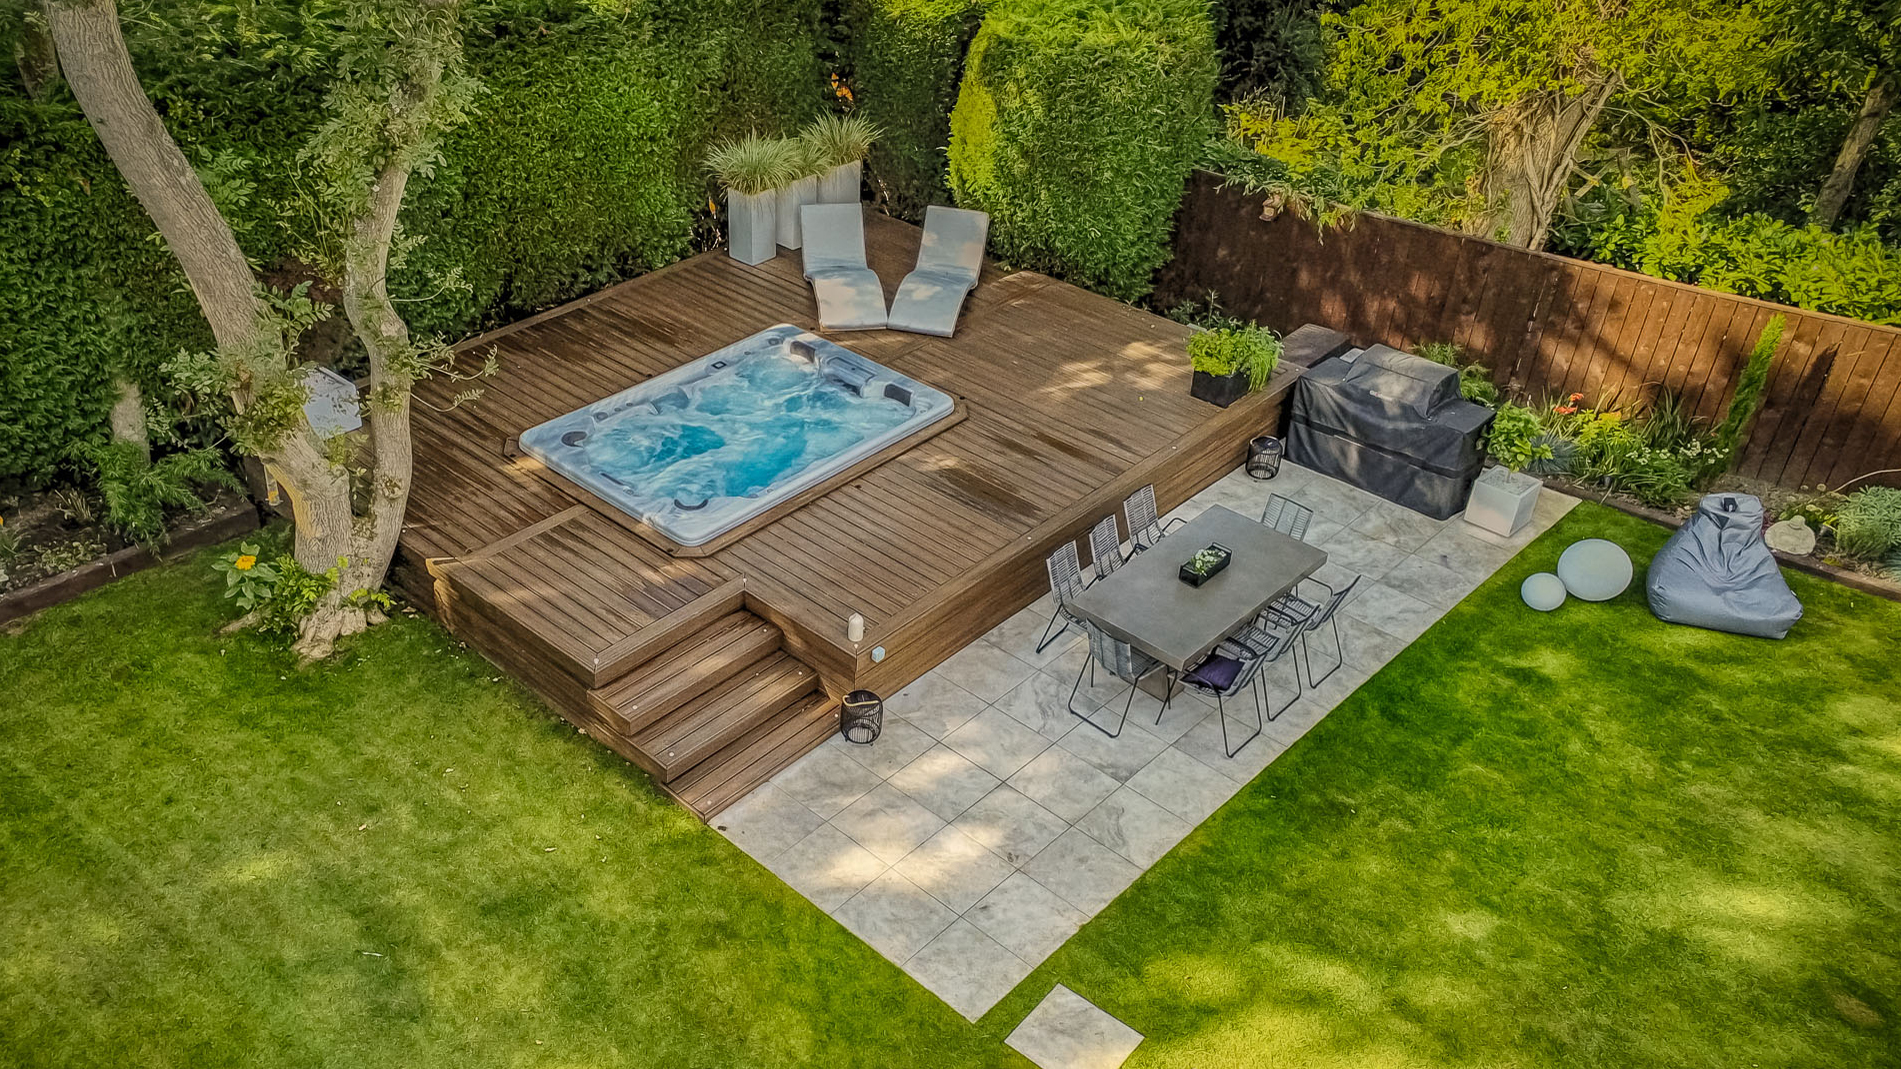 How To Turn Backyard Hot Tub Privacy Into Success